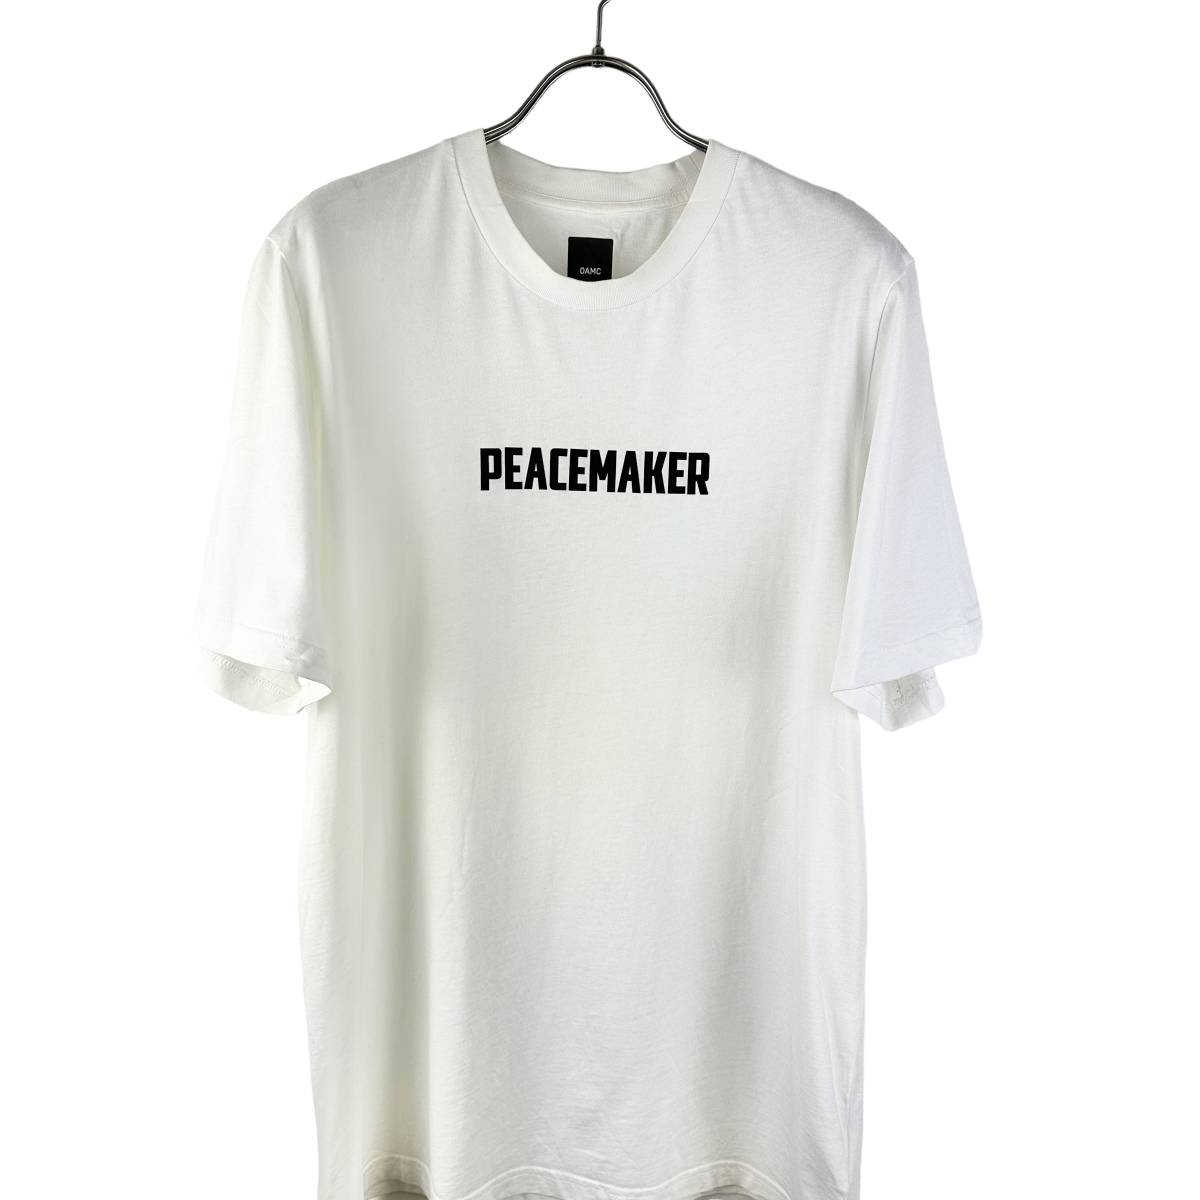 OAMC(オーエーエムシー) PEACEMAKER BEE BACK PATTERN T Shirt (white